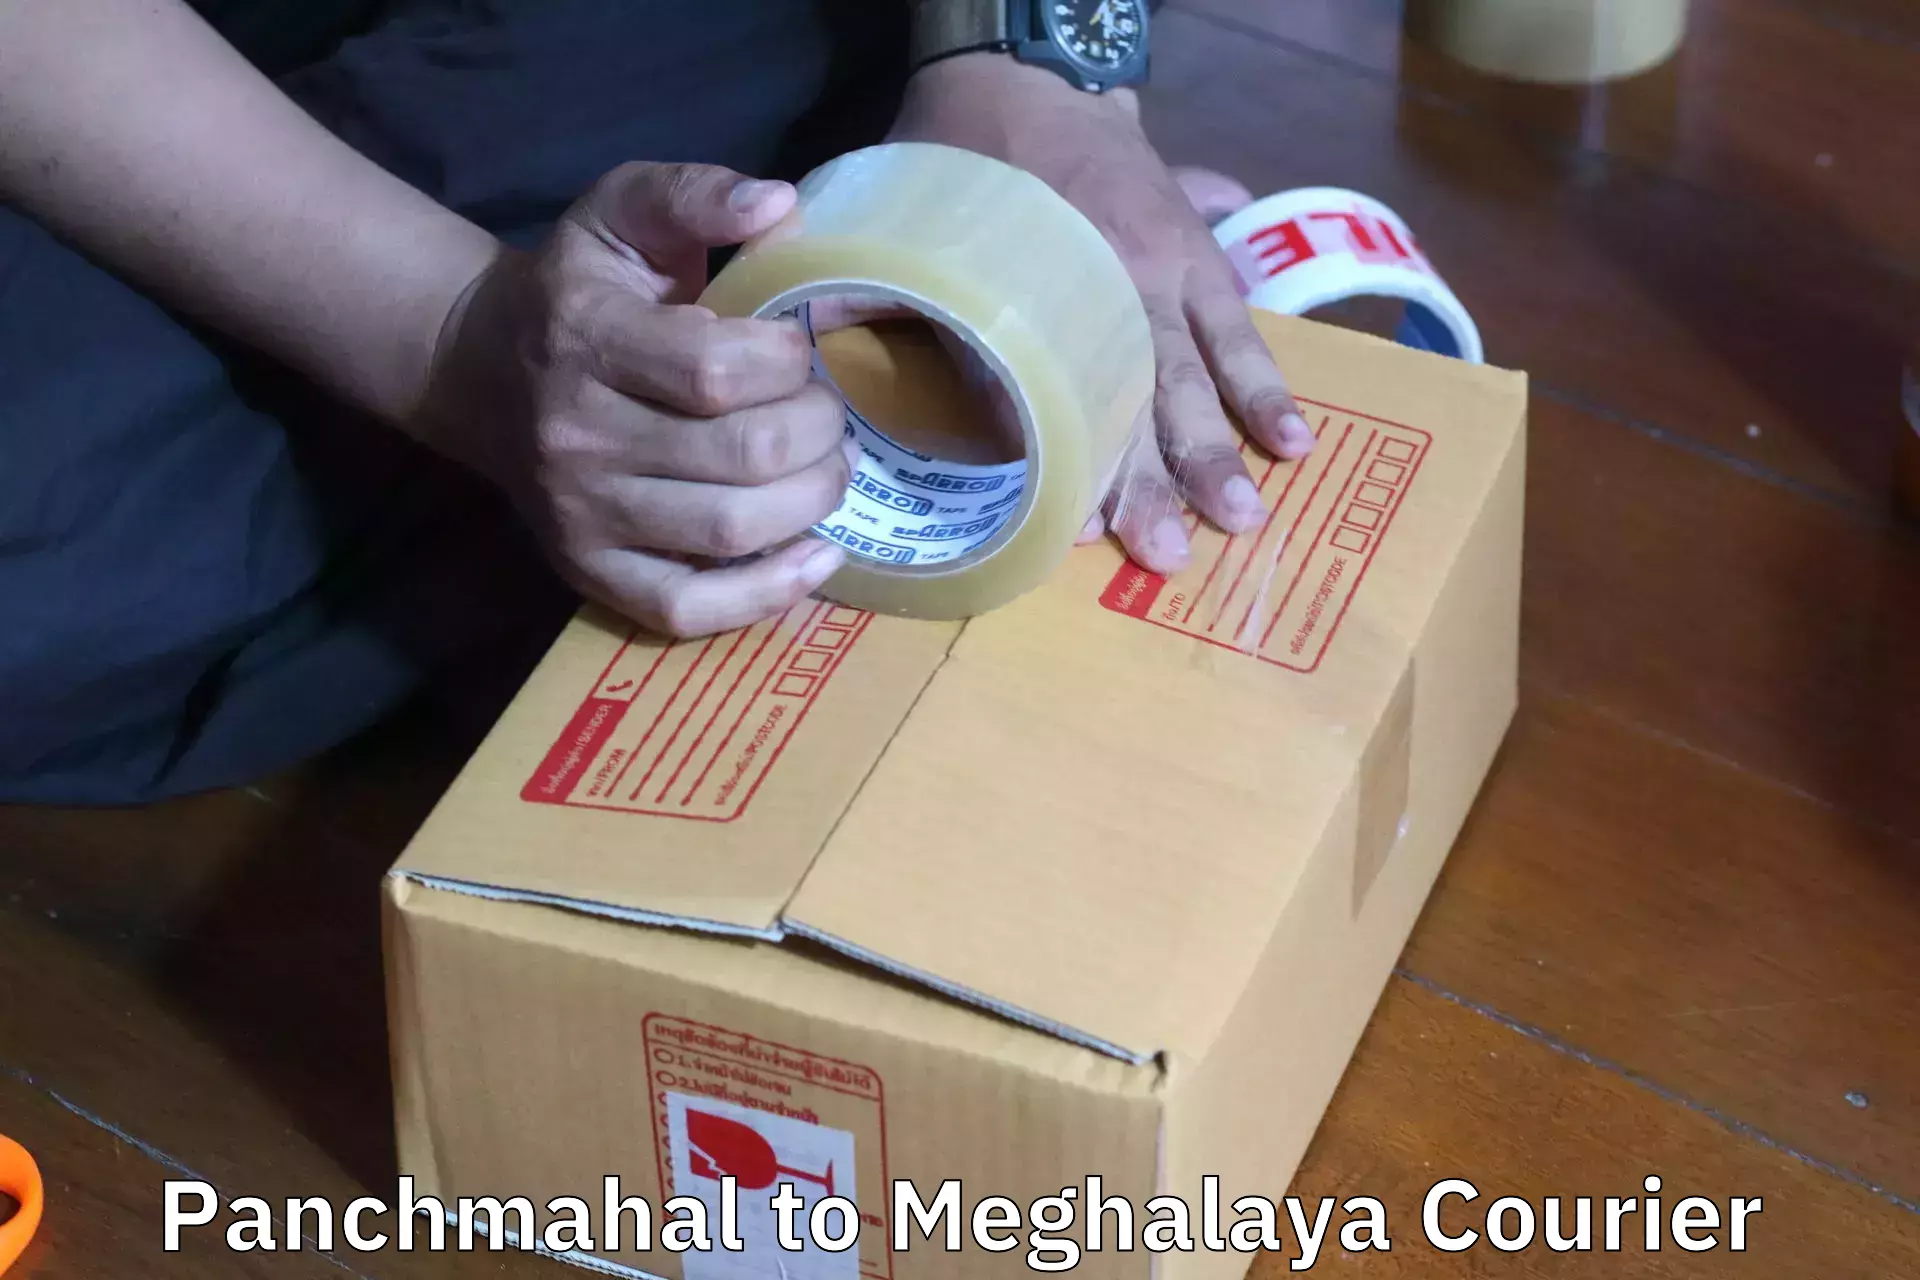 Home relocation experts Panchmahal to Meghalaya